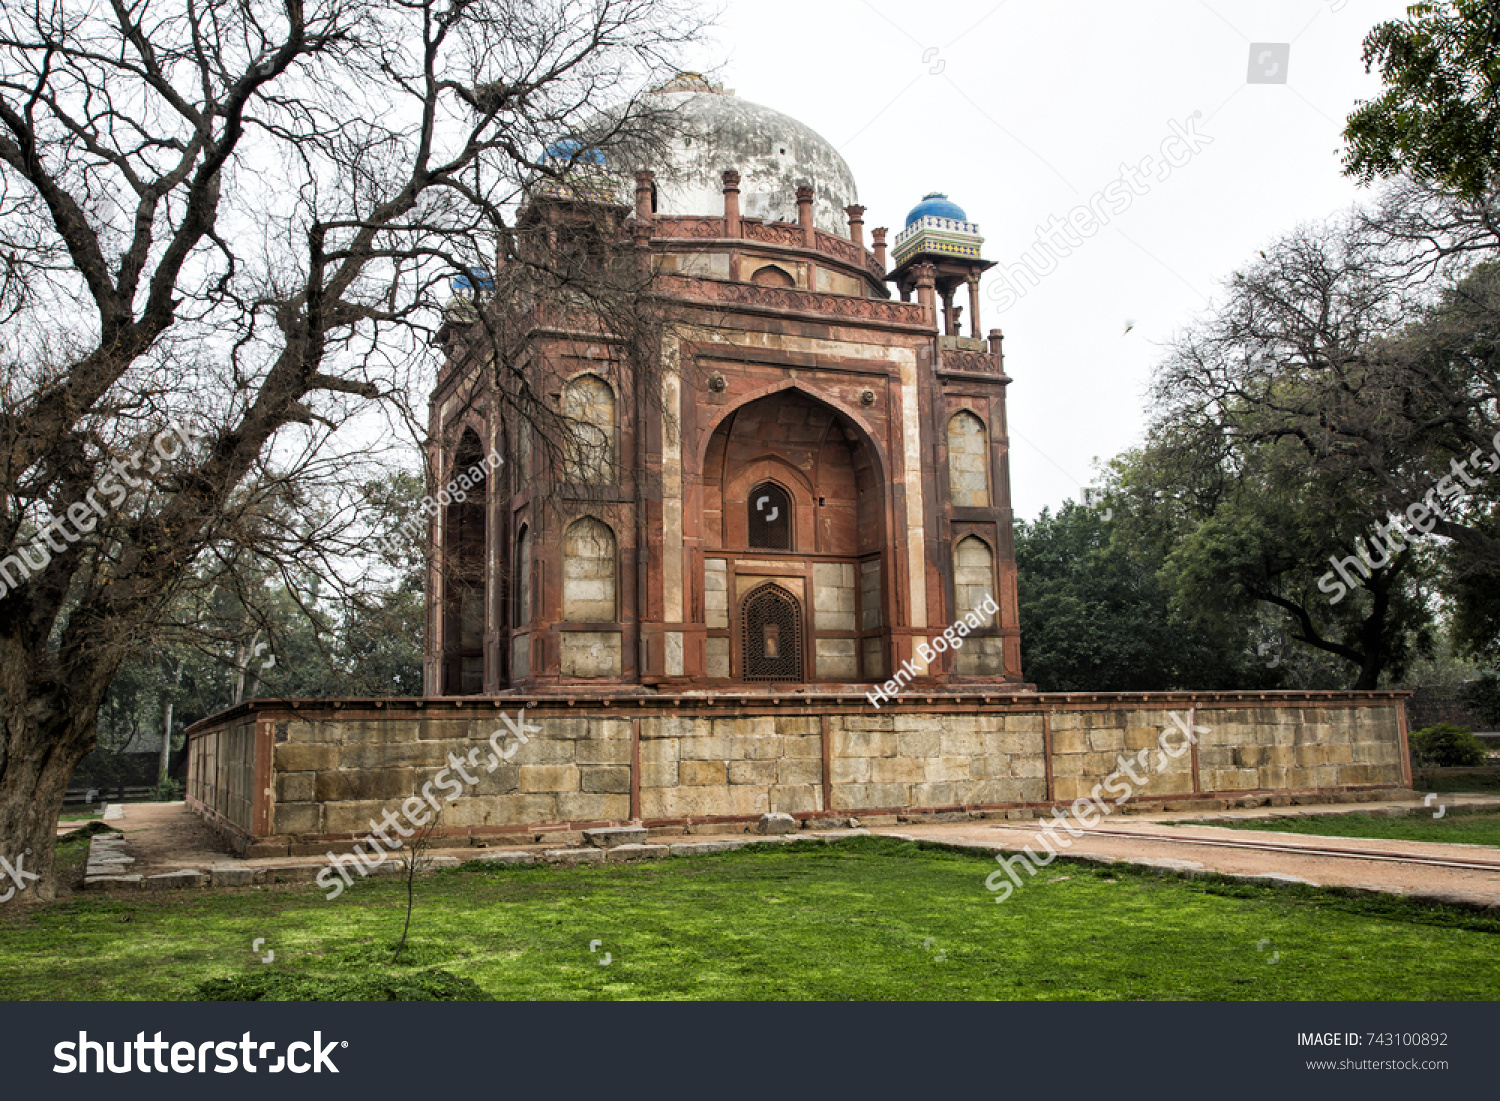 Building on the complex of Humayun's Tomb - New Delhi - India
 #743100892